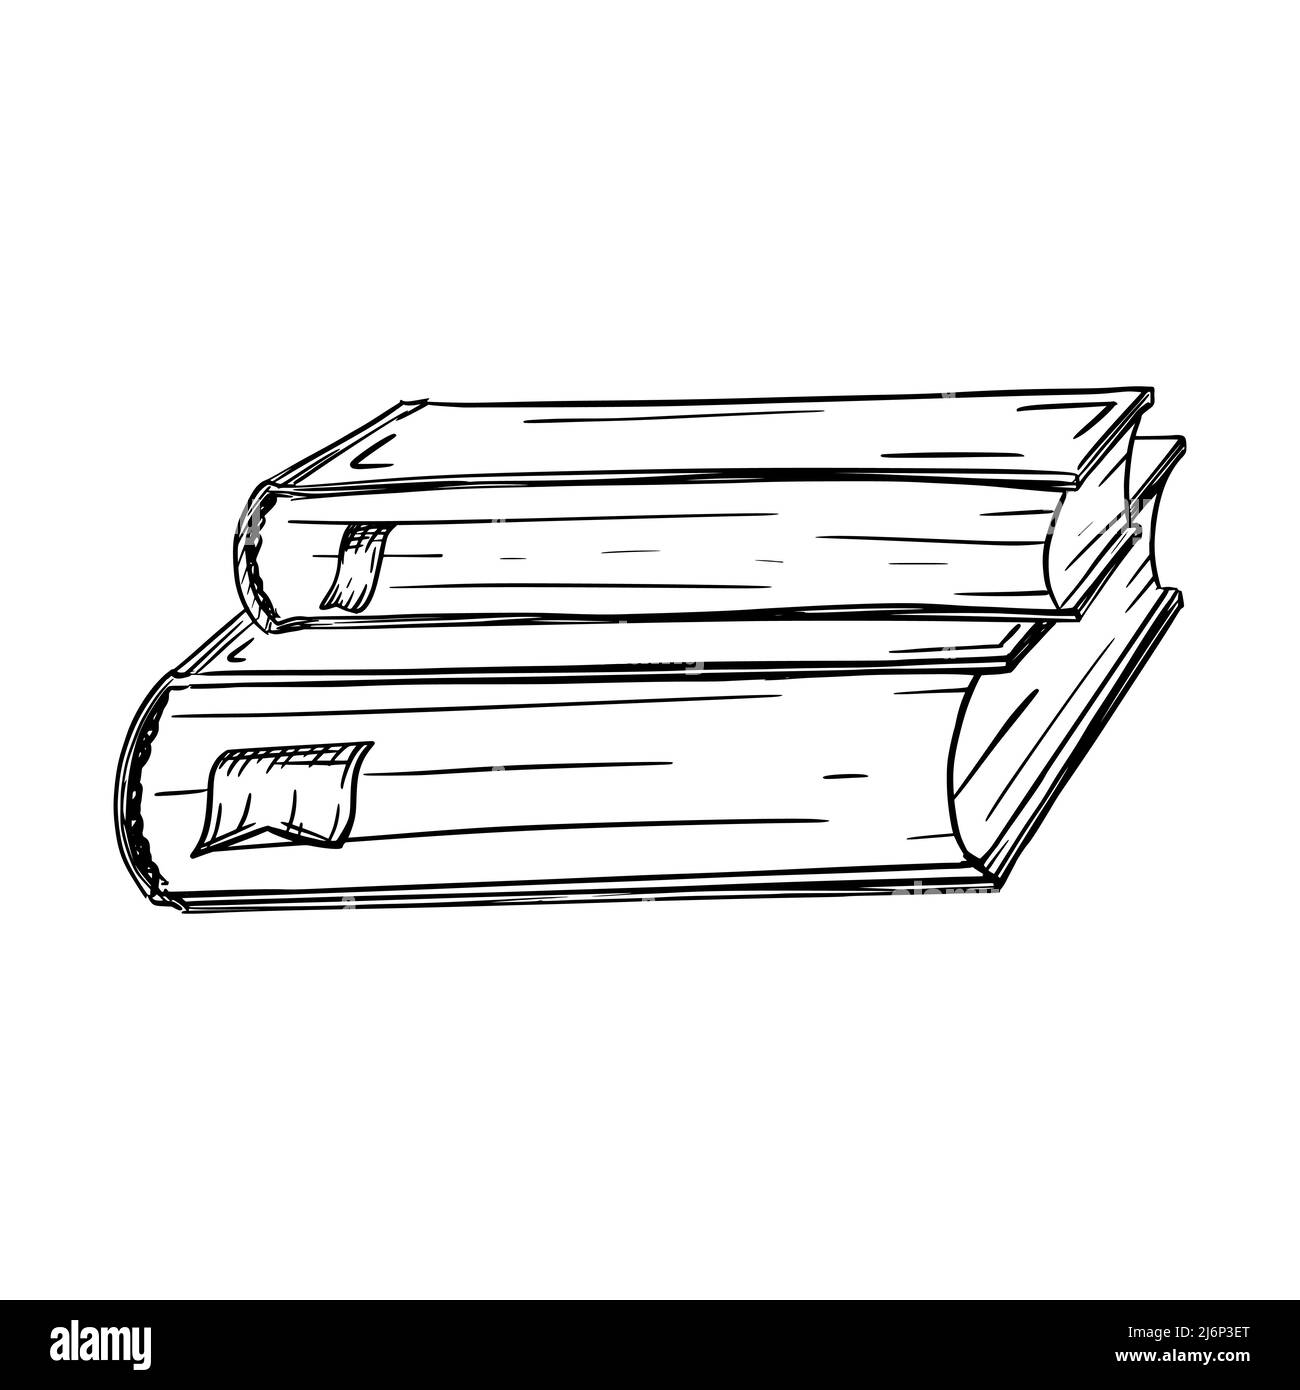 Sketch of books with bookmarks. Two books are stacked on top of each other. Textbooks are in perspective. For education, reading, and studying. Hand d Stock Vector